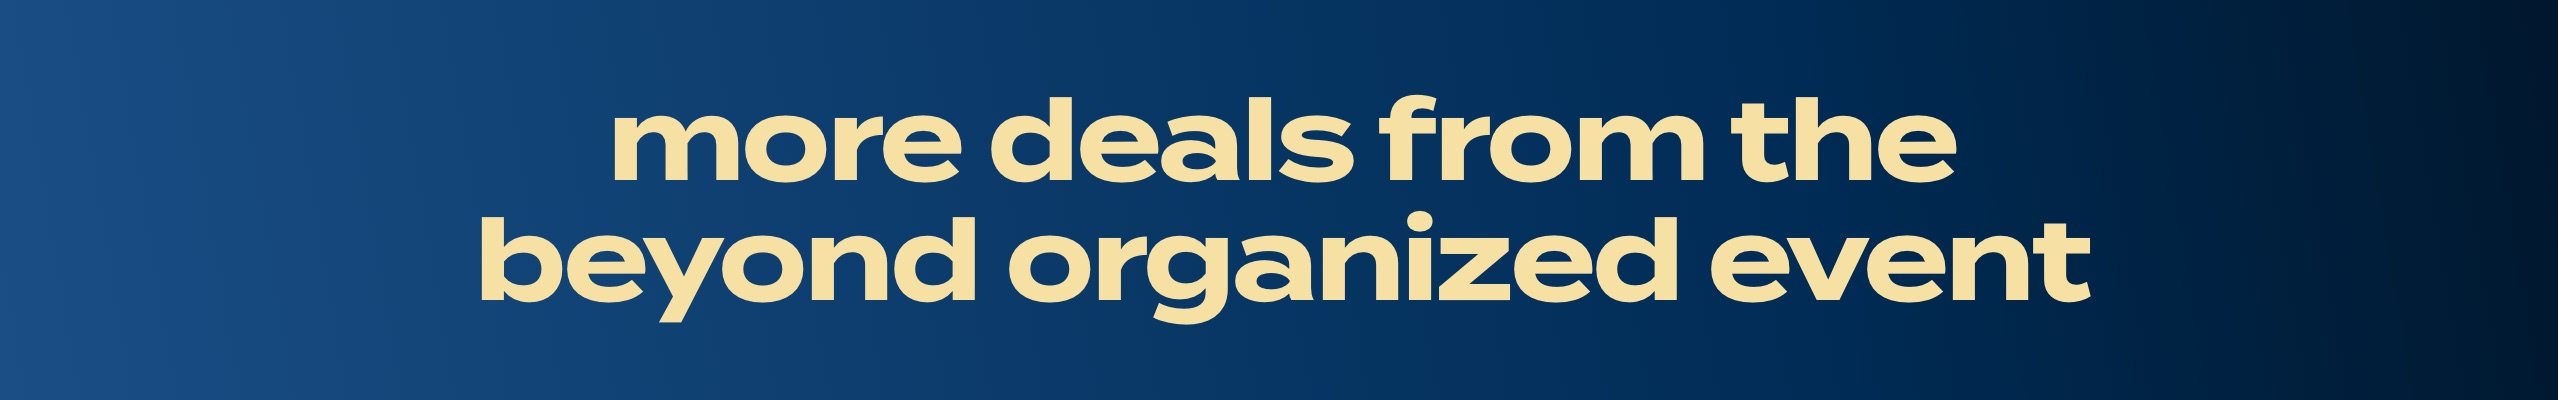 more deals from the beyond organized event